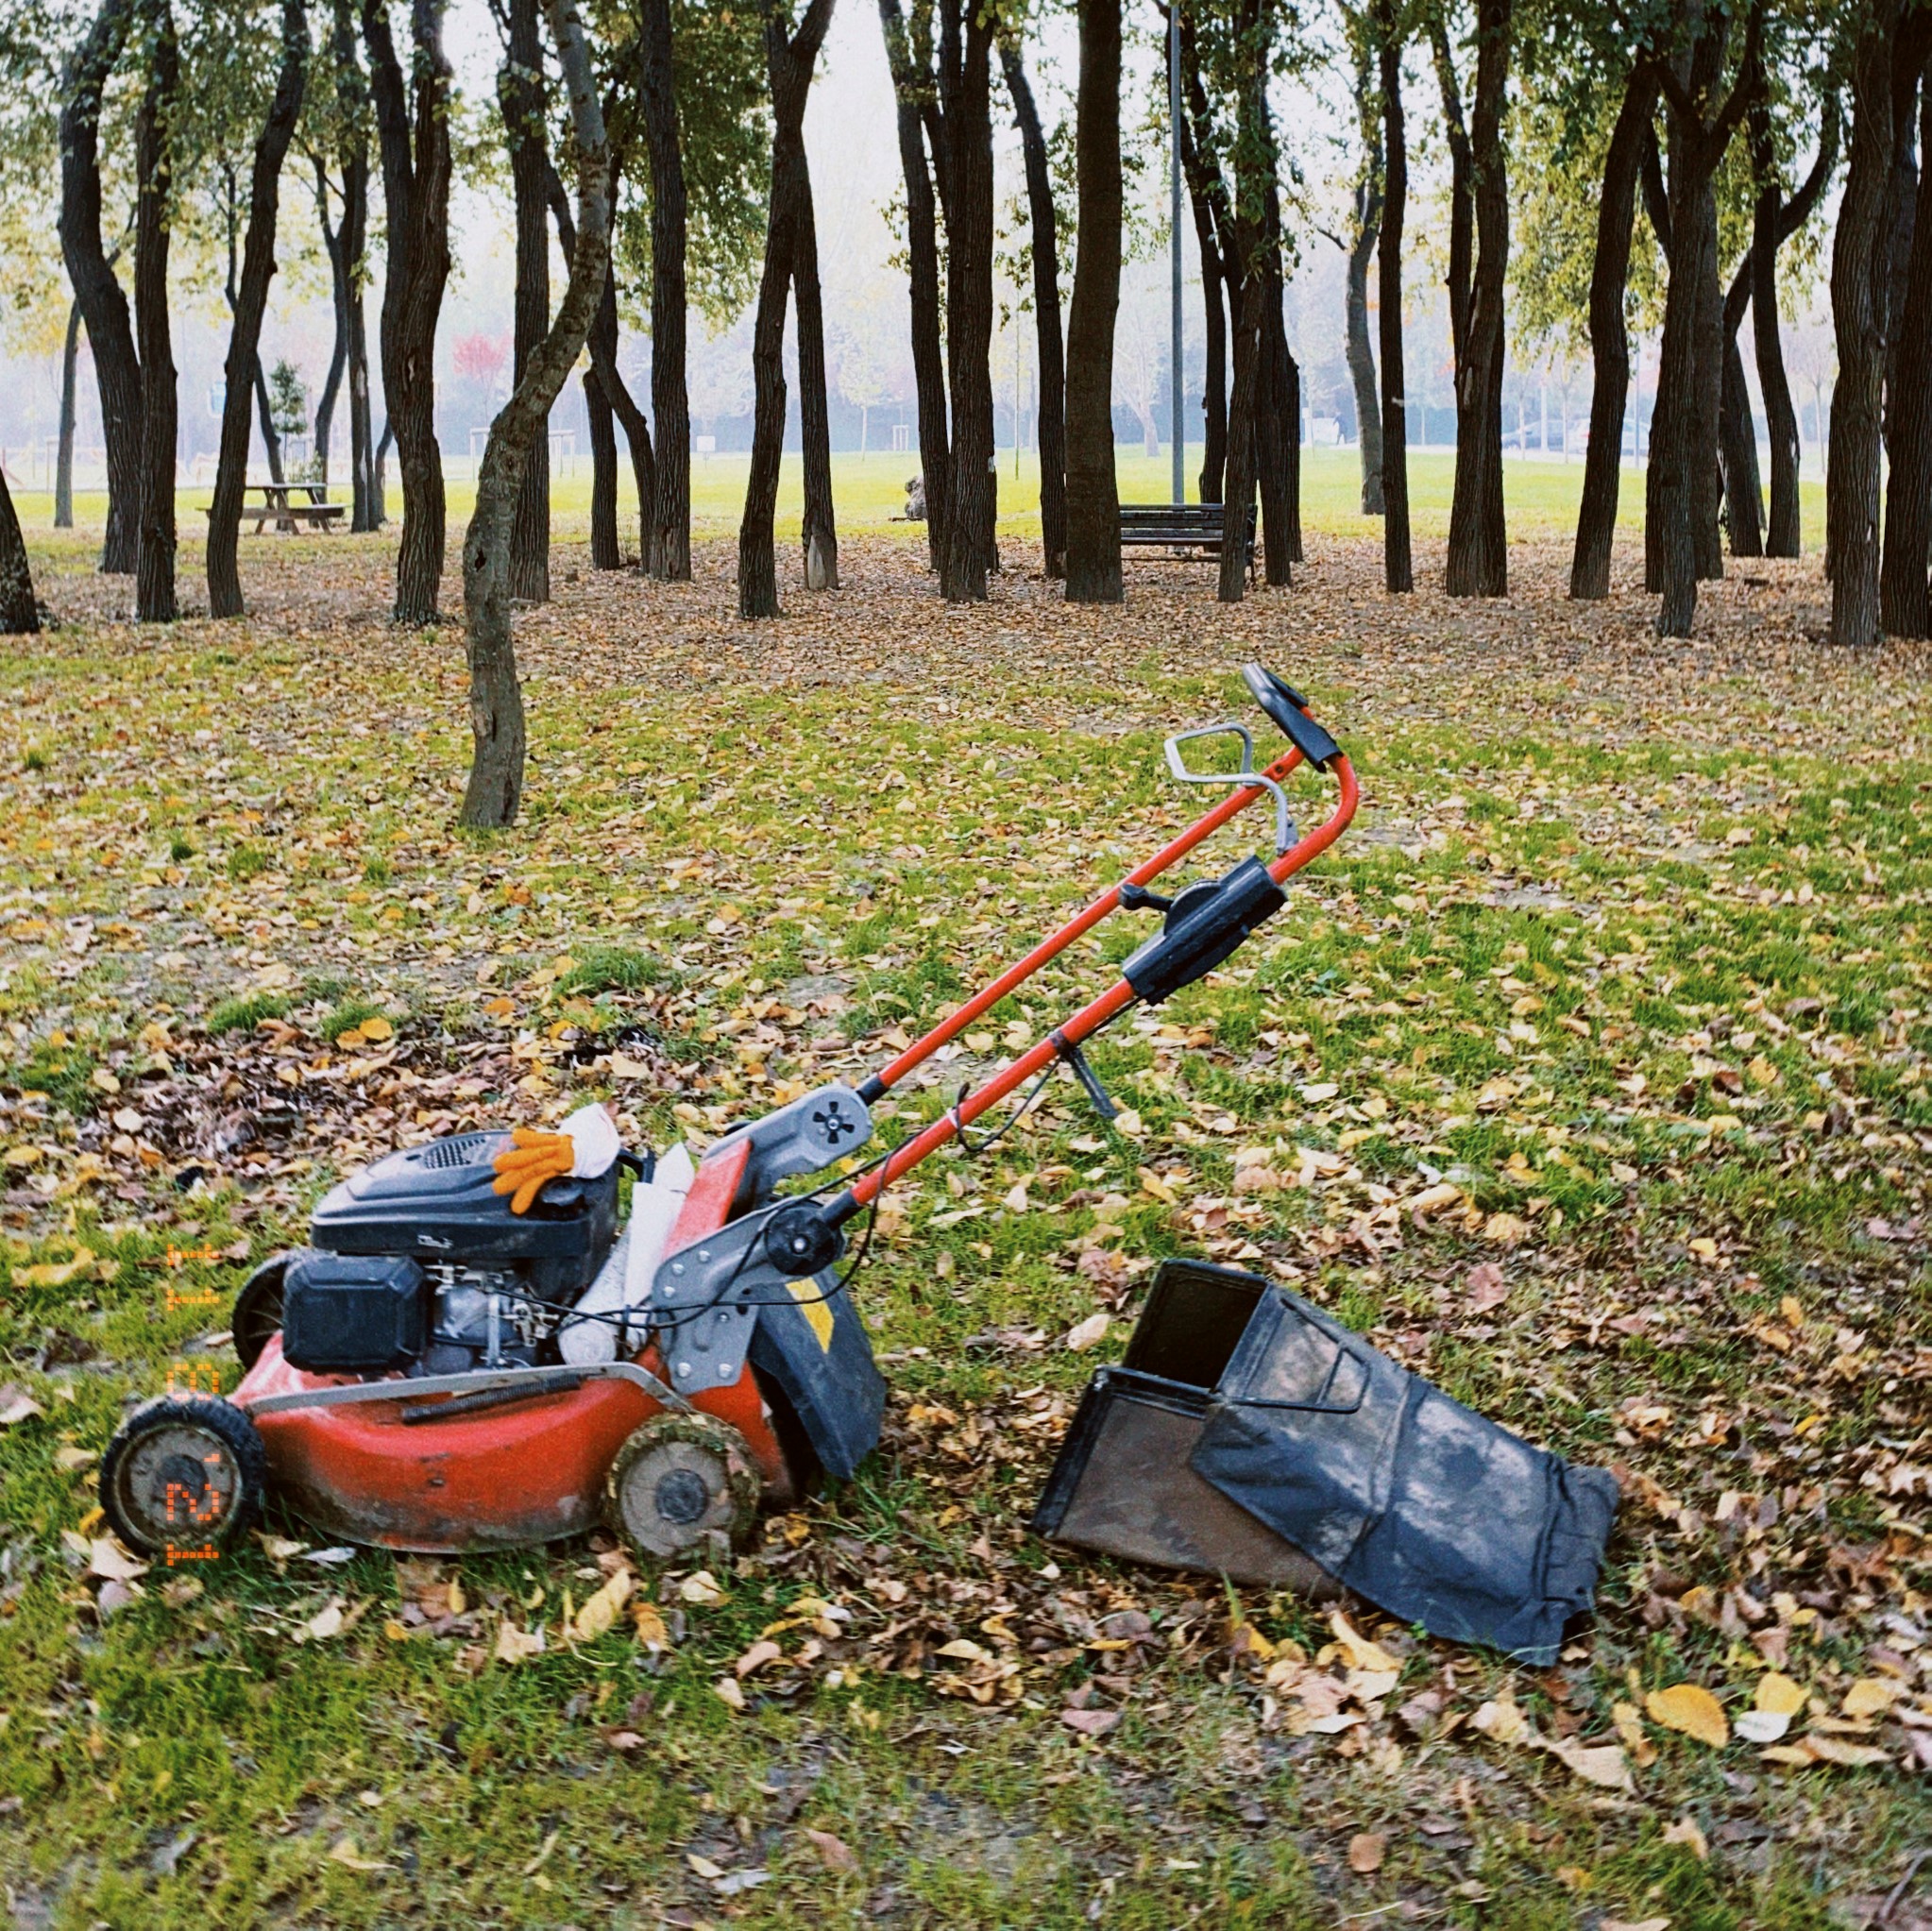 7 Best Lawn Mower Lifts Review & Buying Guide